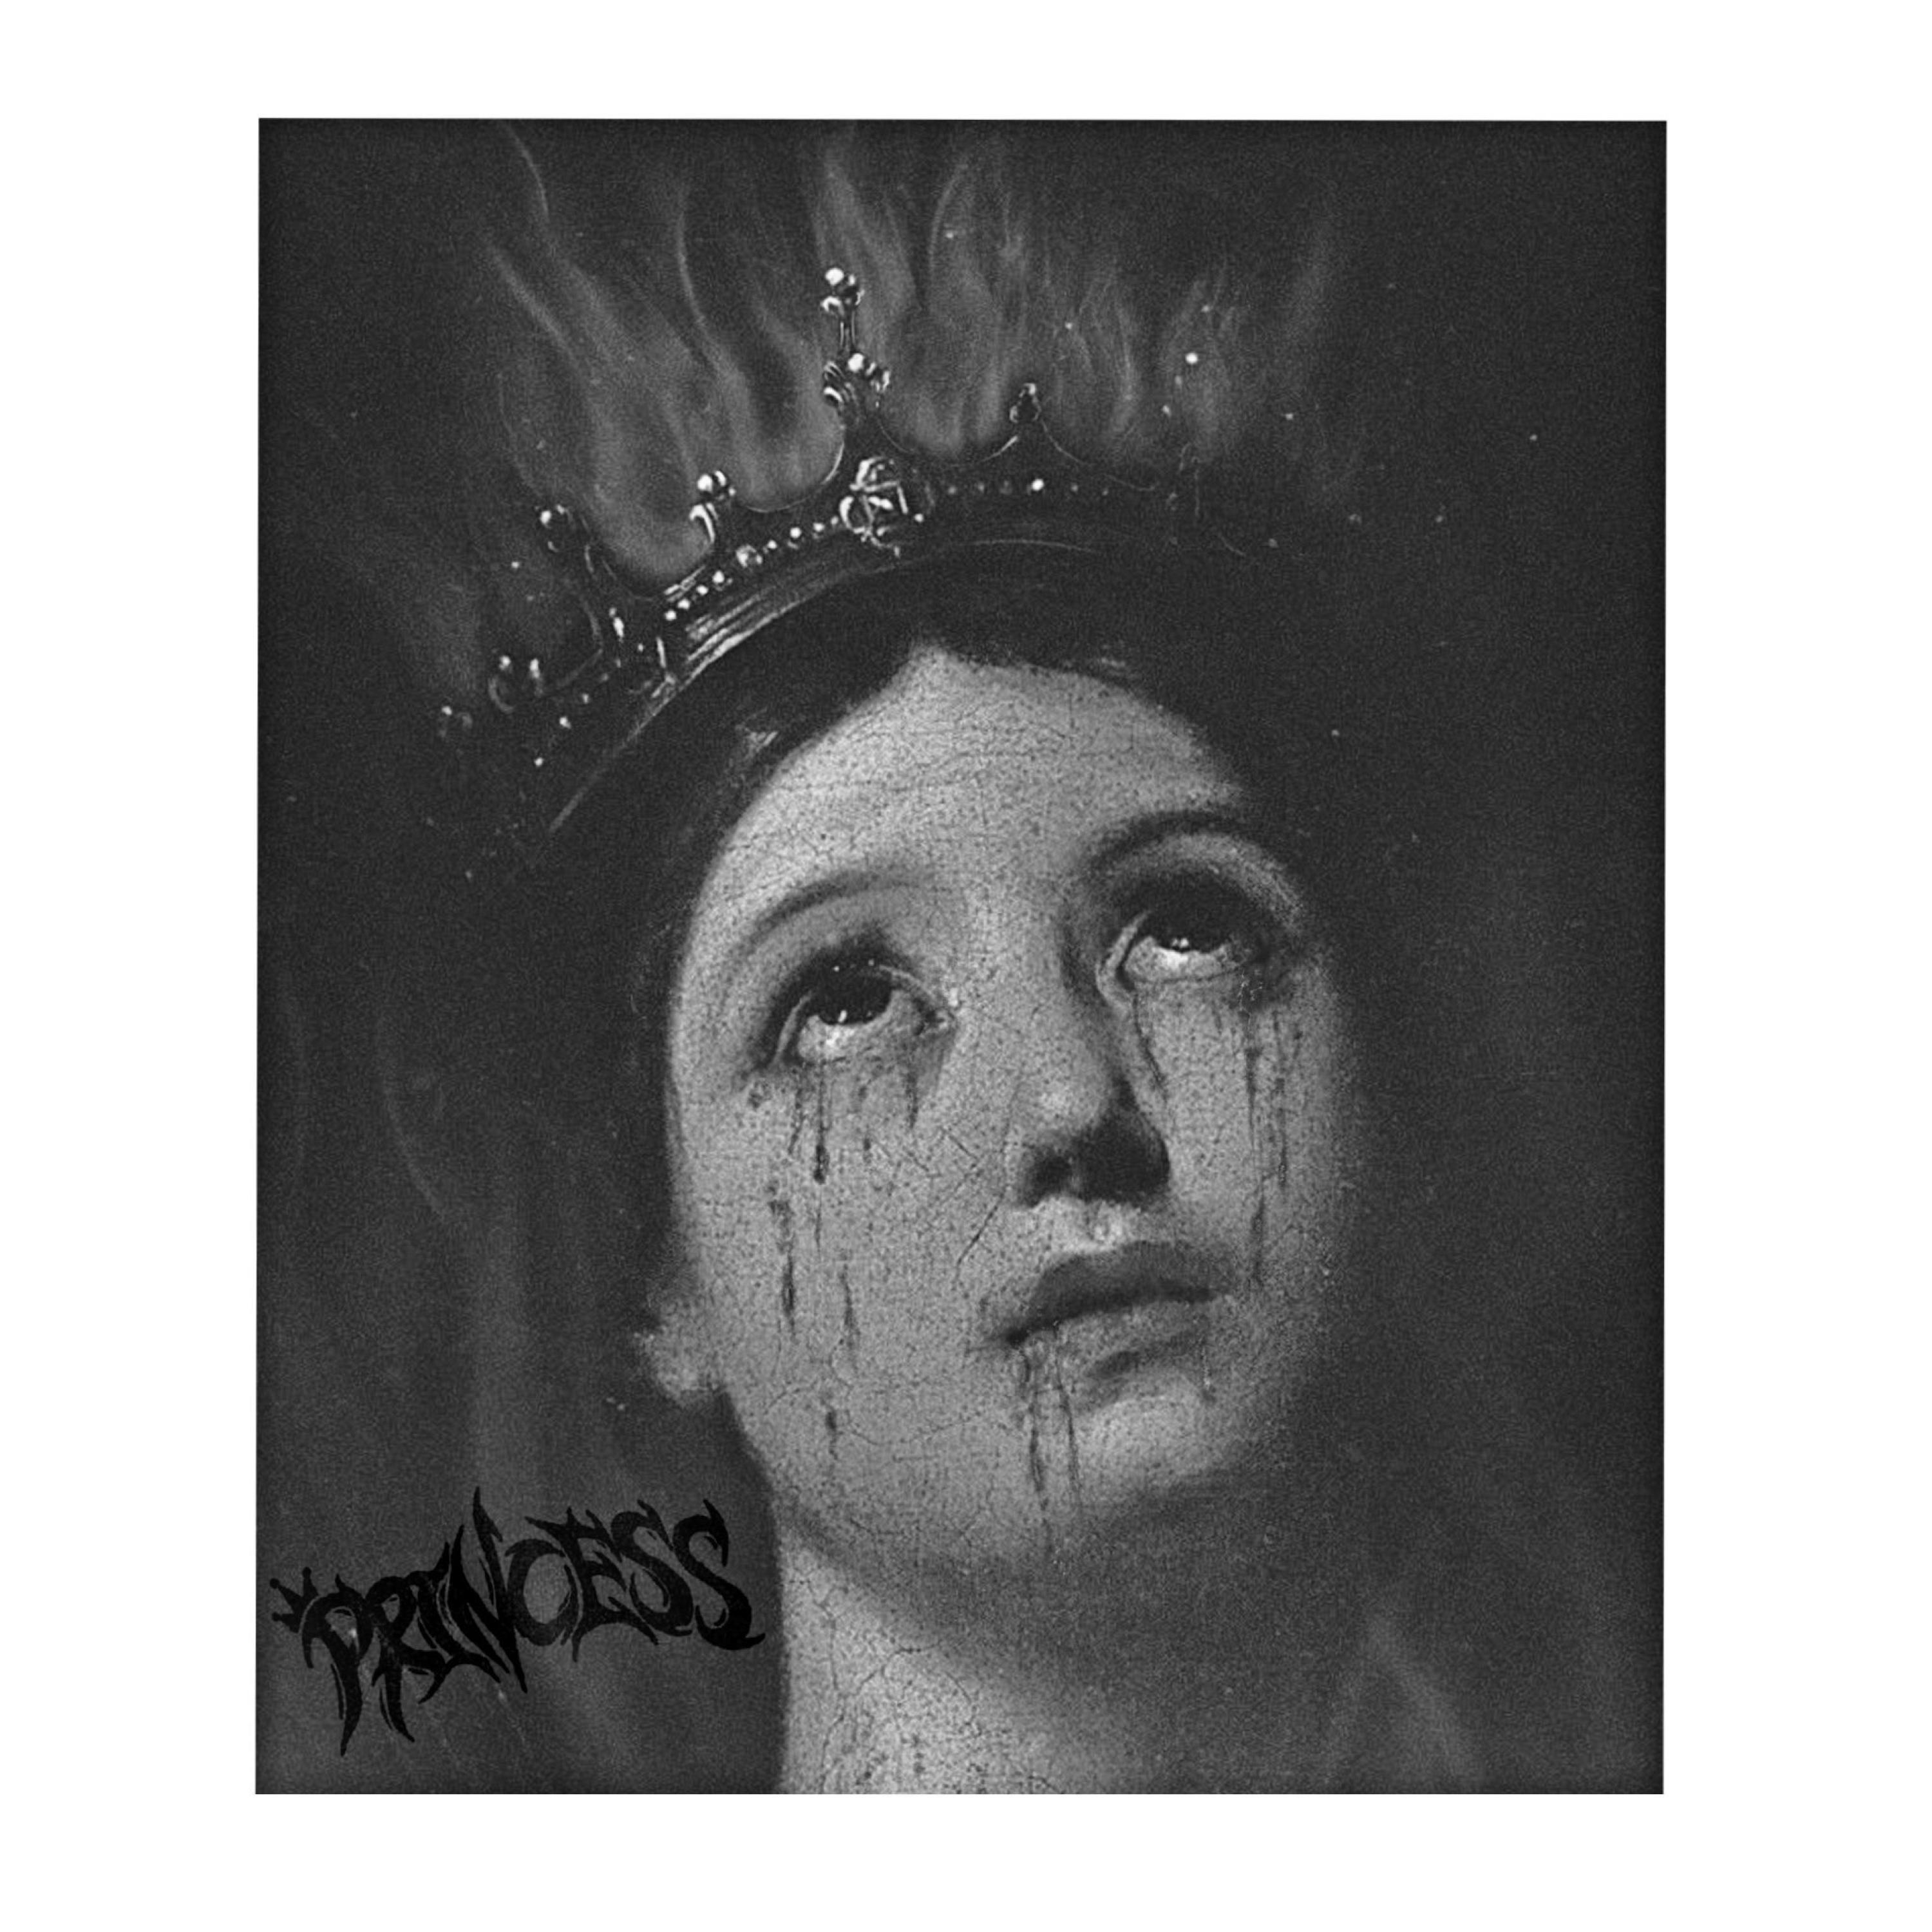 Princess - WISHES FOR AN UNTIMELY DEMISE (feat. Street Power & Chris Cesarini)